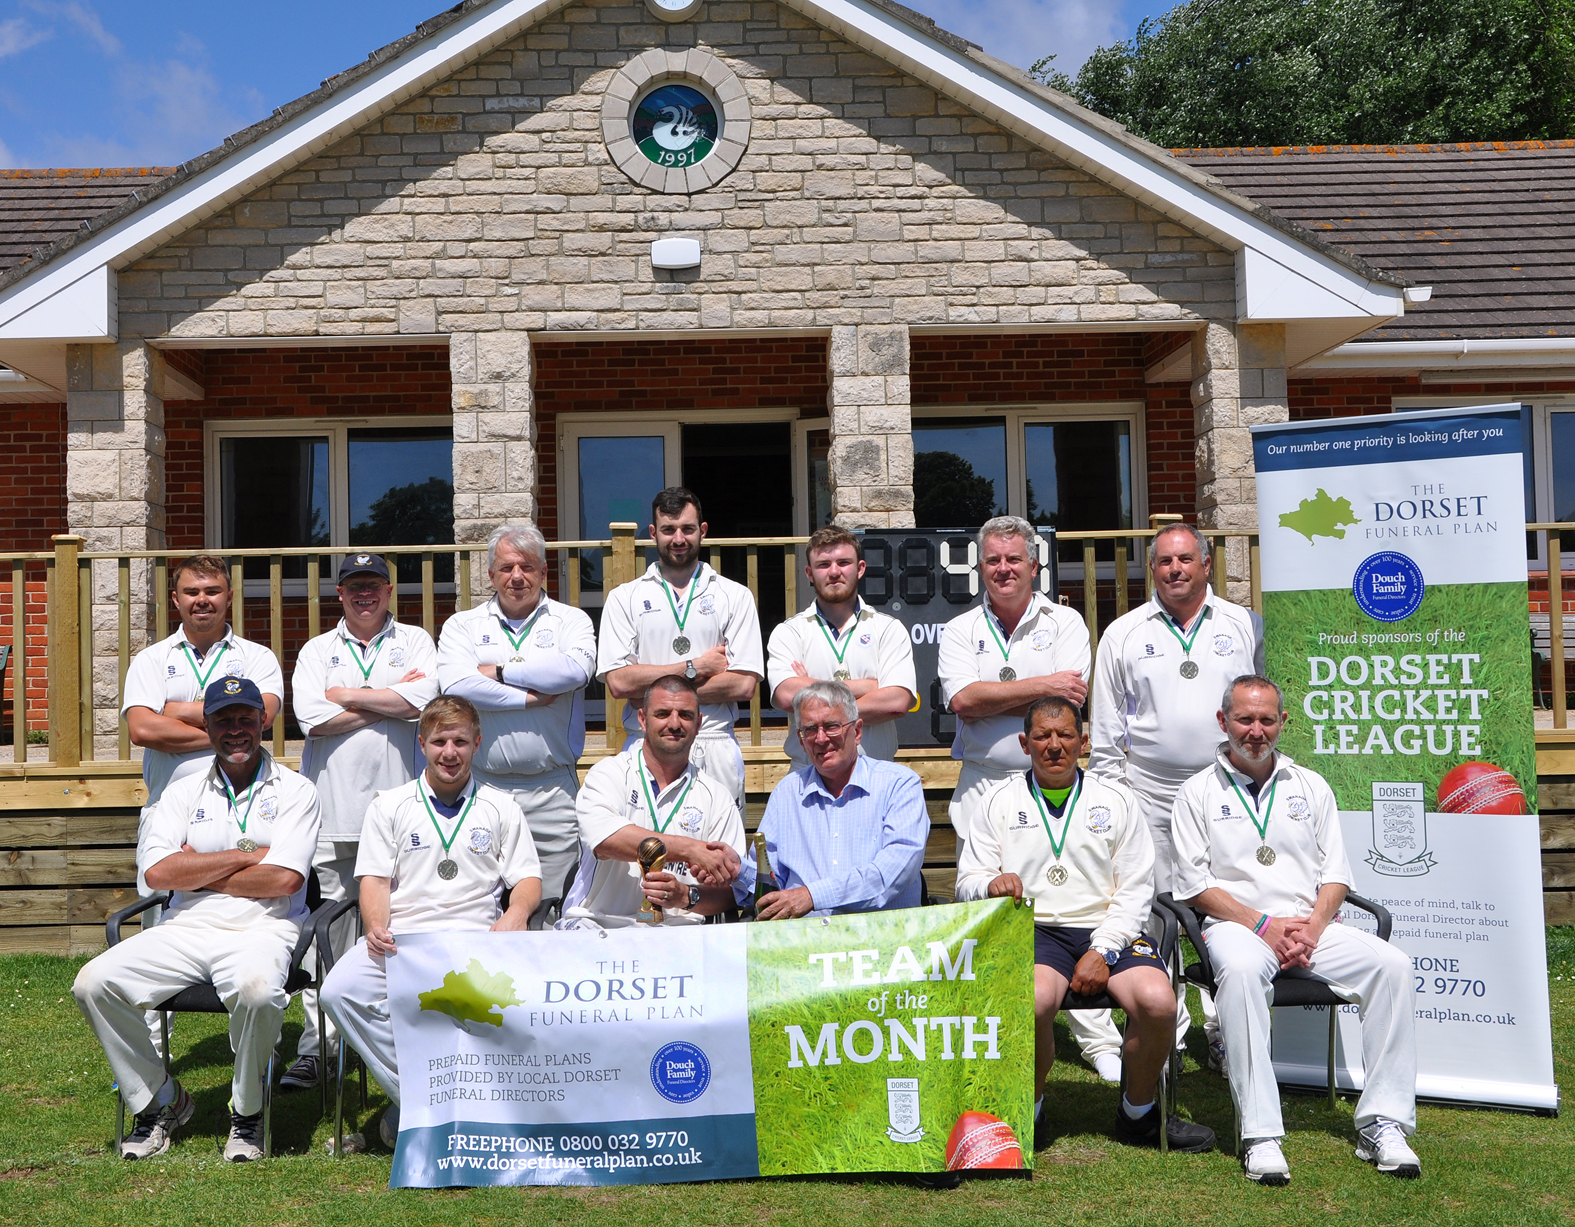 Dorset Funeral Plan Cricket League team of the month for May 2017 - Swanage Cricket Club